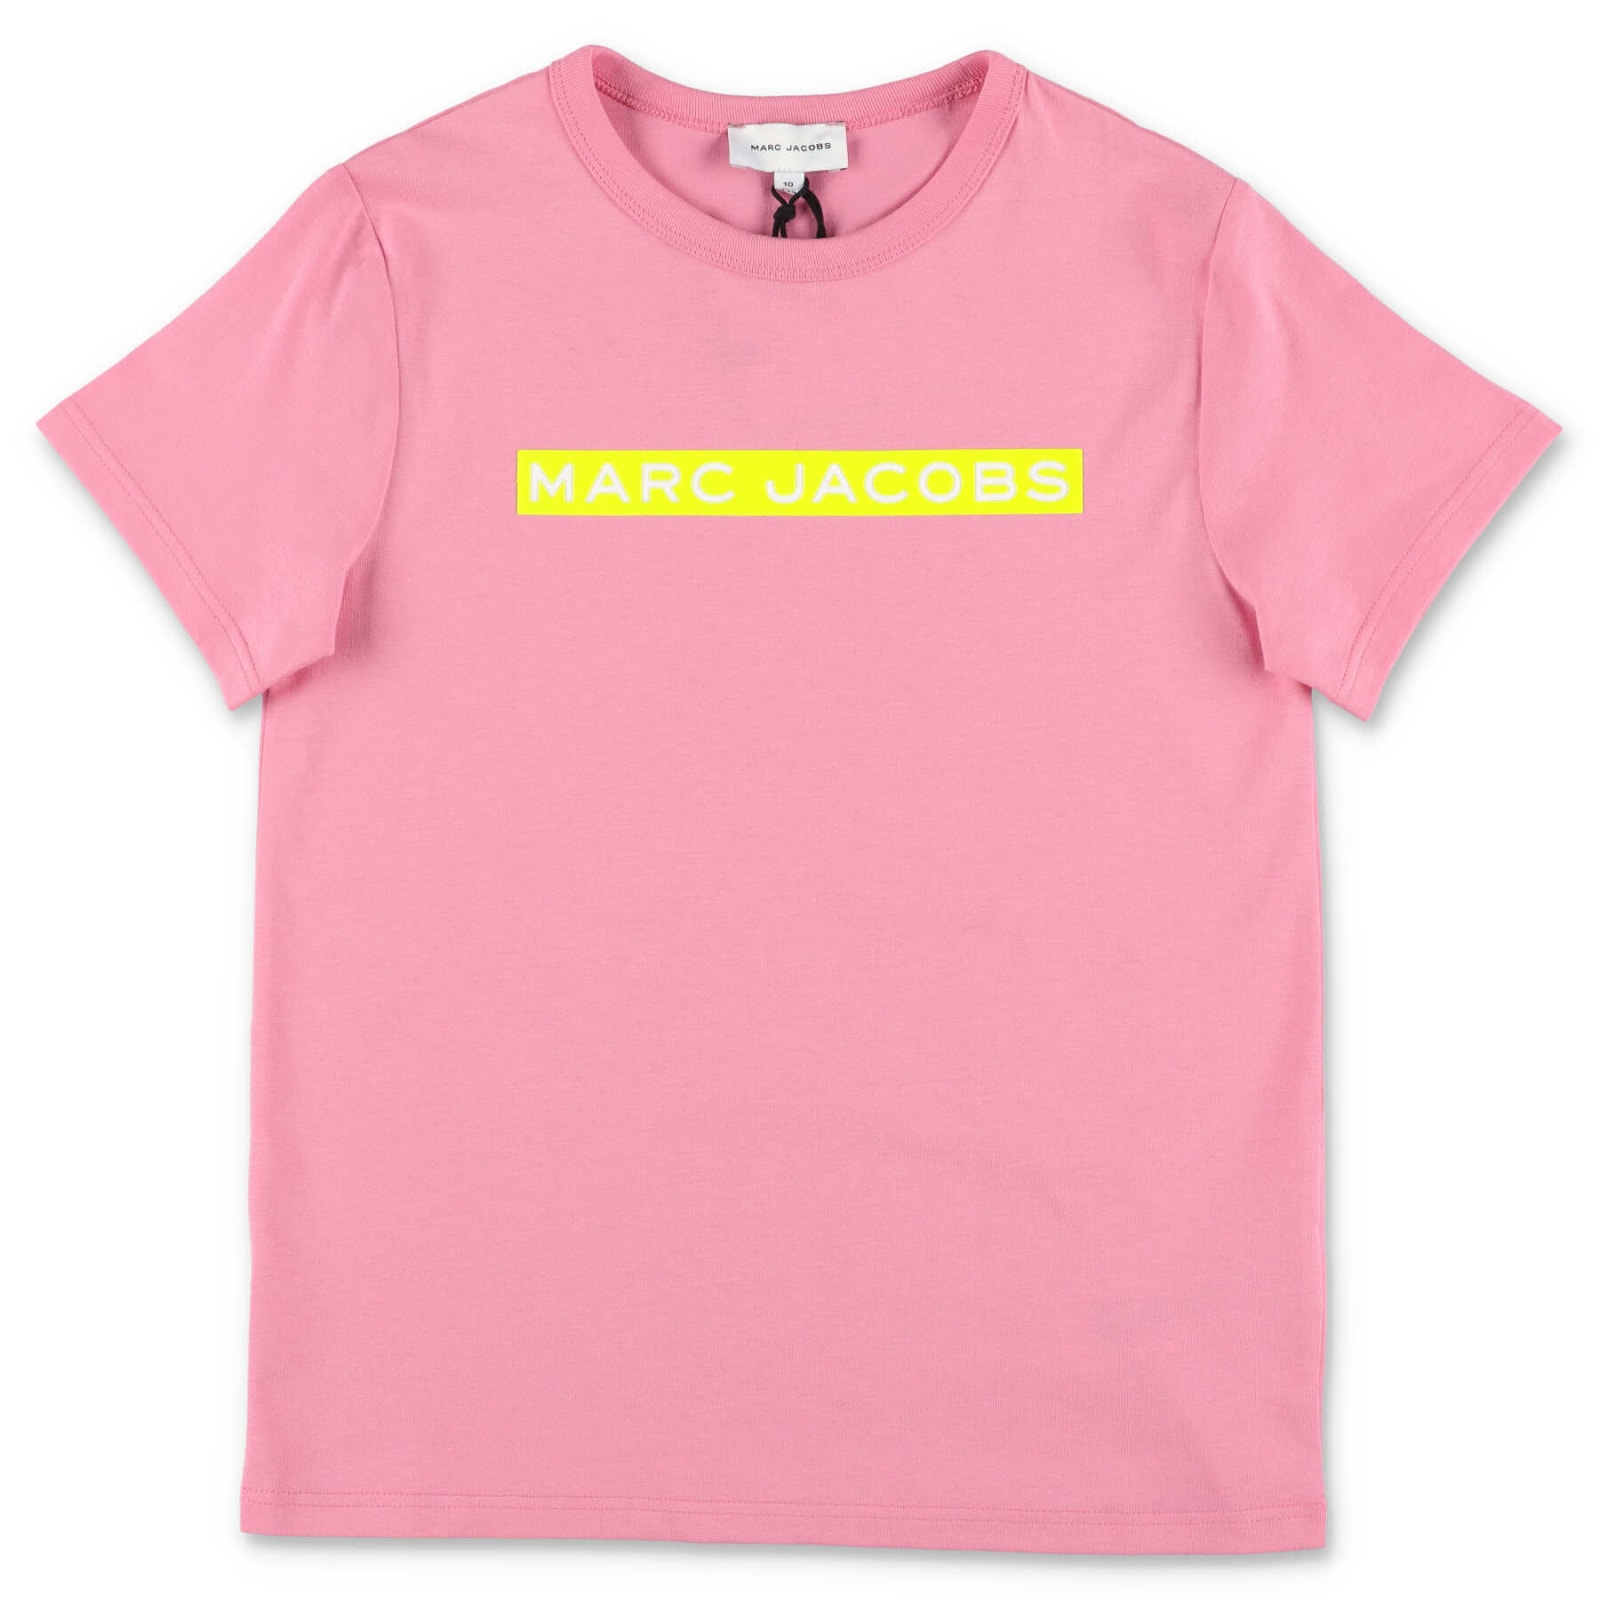 MARC JACOBS MARC JACOBS T-SHIRT FUCSIA IN JERSEY DI COTONE BAMBINA